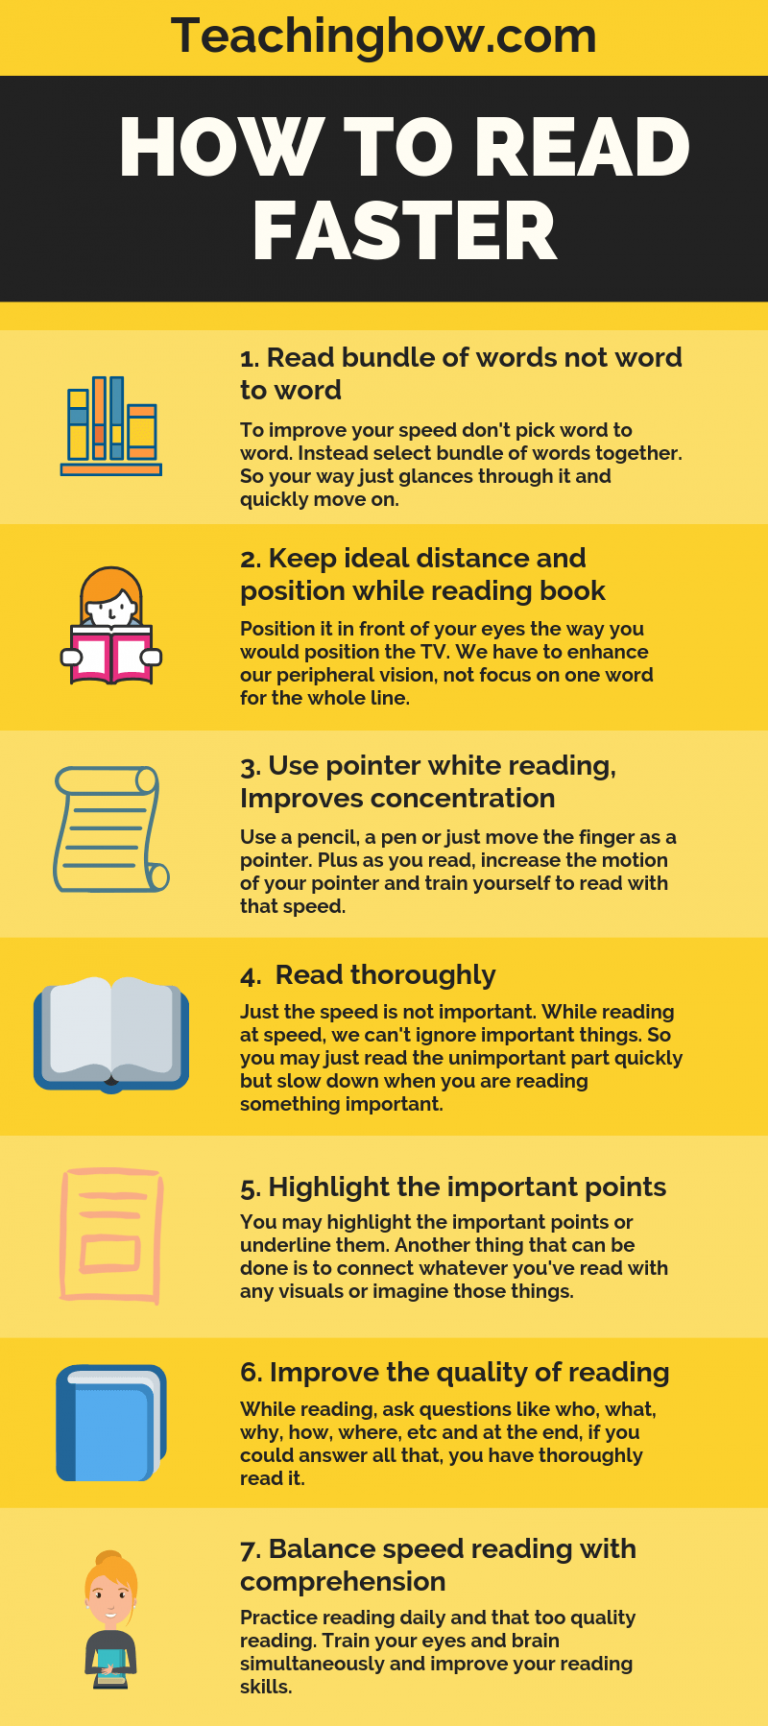 How to Read Faster and Improve Reading Comprehension?